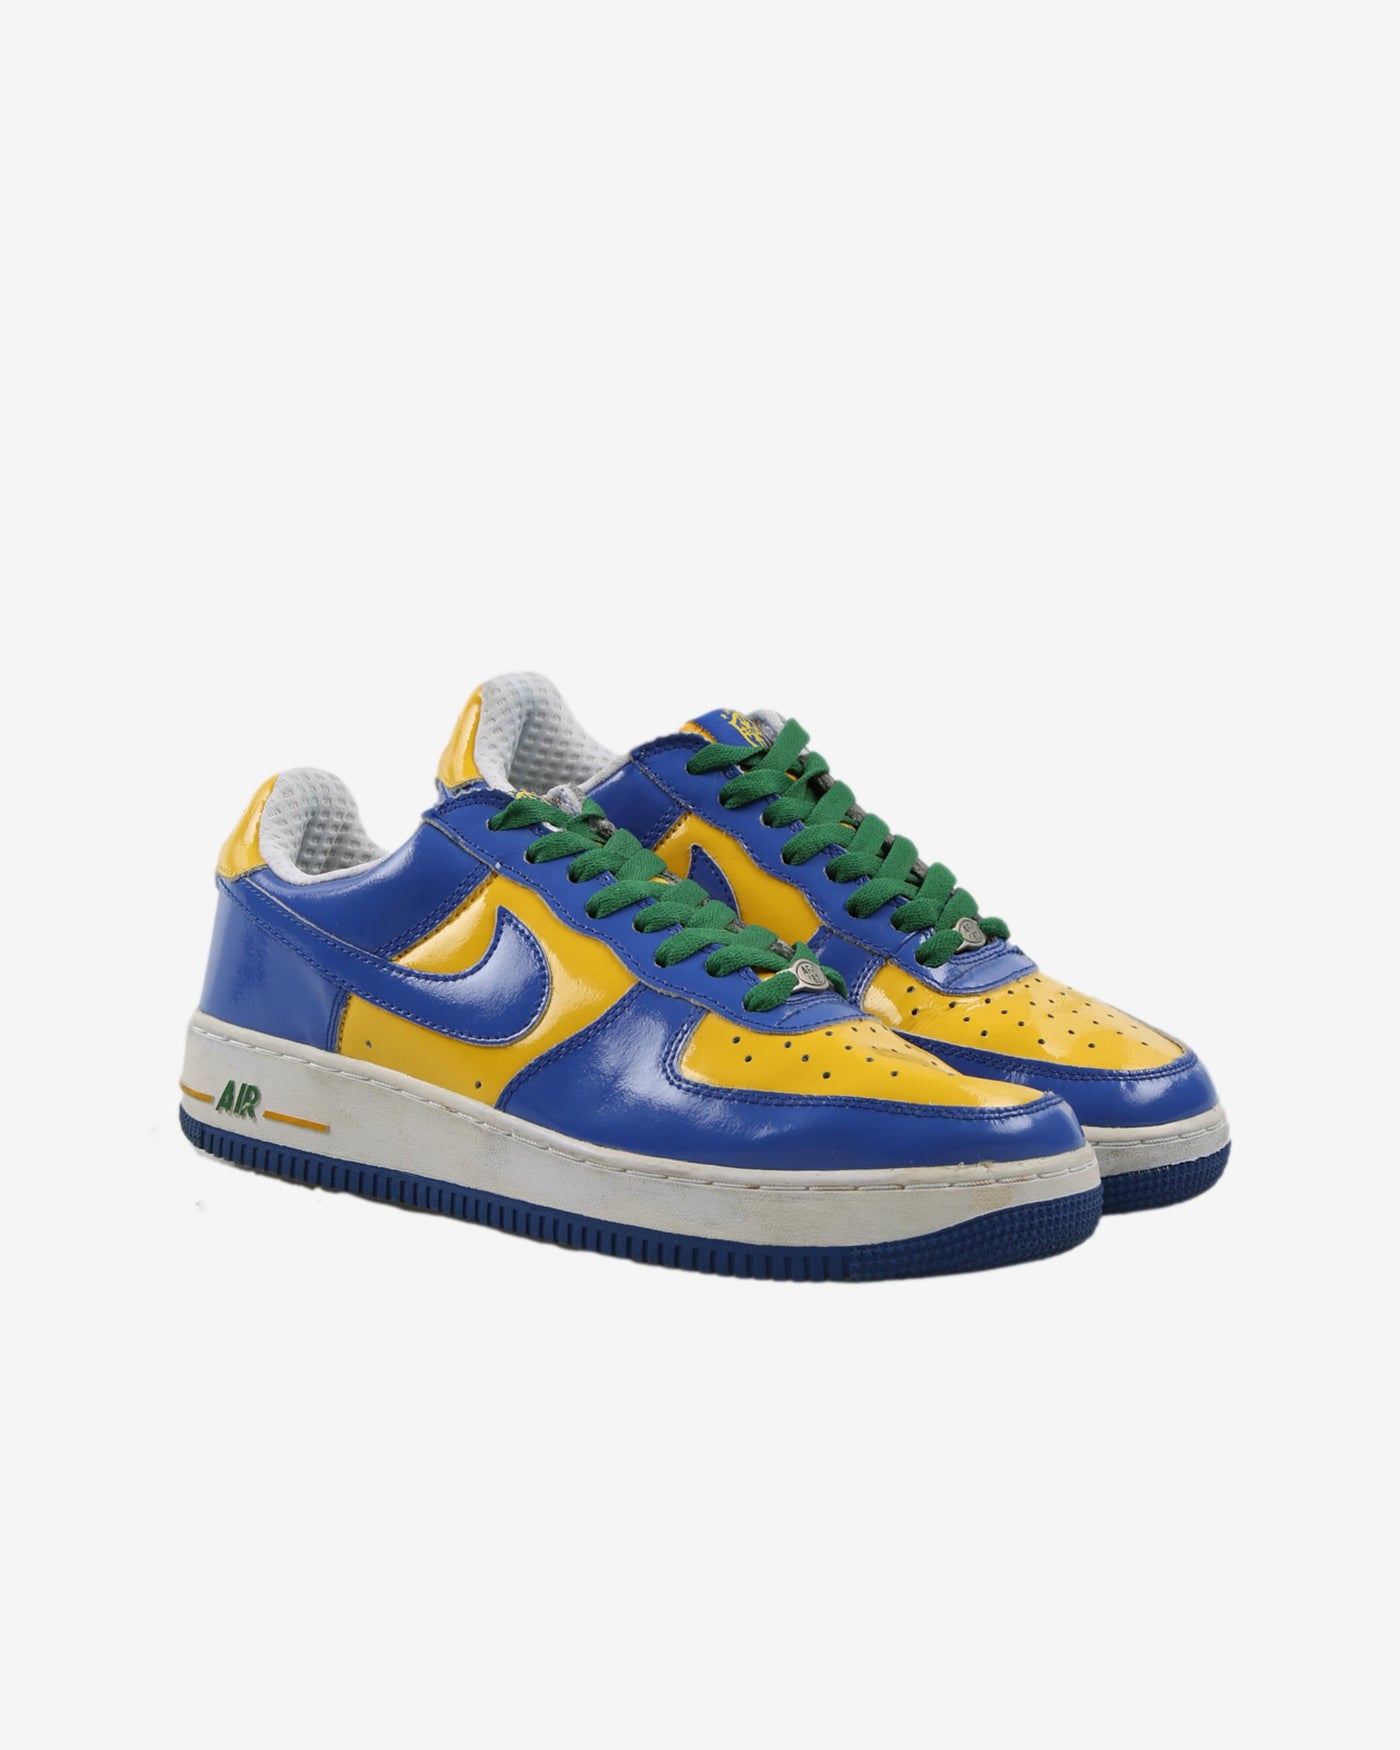 Nike Brazil Air Force 1 2006 World Cup Release Blue / Yellow Sneaker / Trainer - UK 8